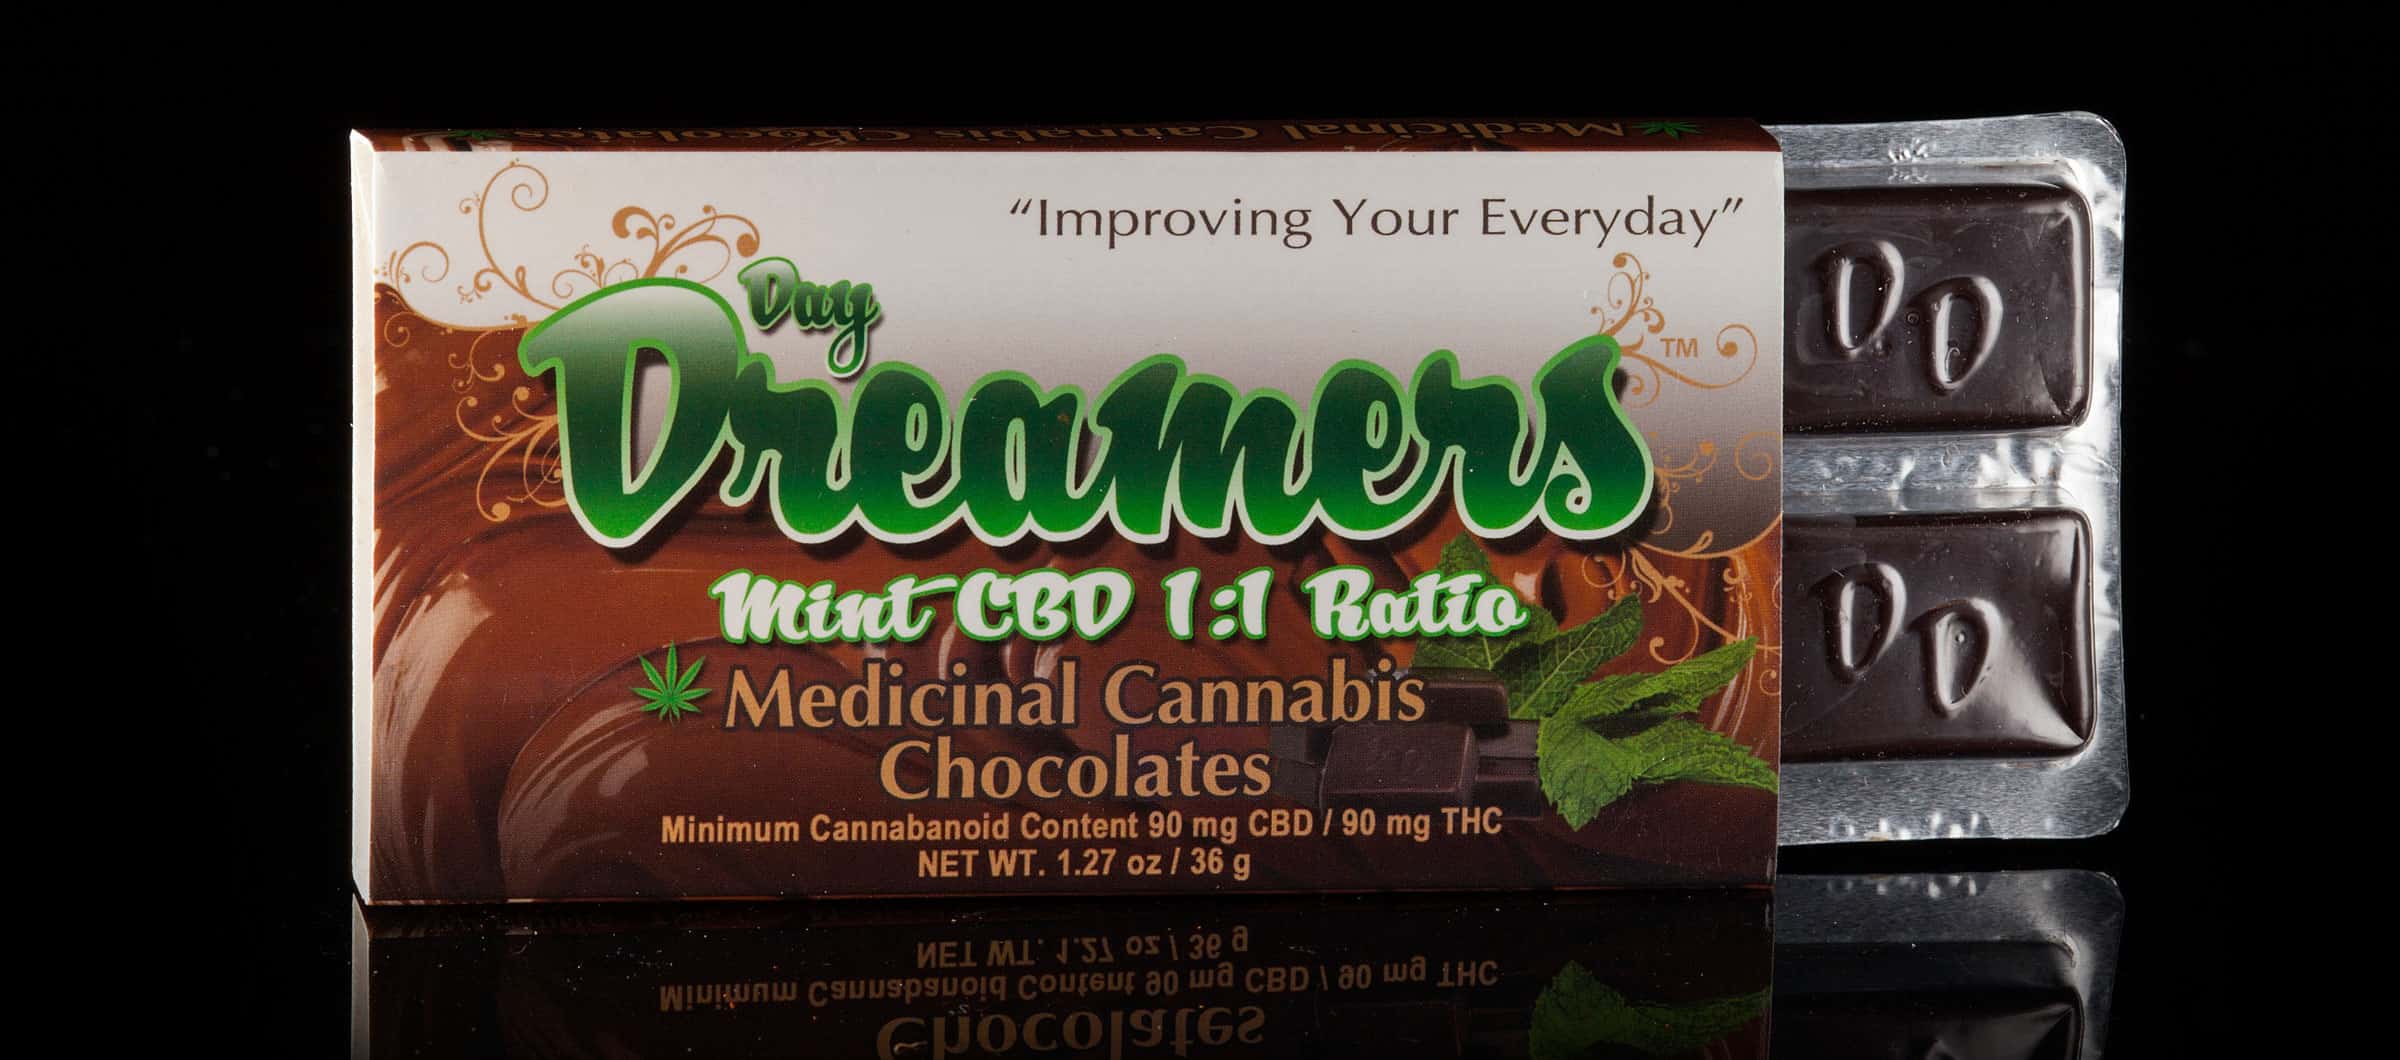 cbde09_day_dreamers_1_to_1_cbd_mint_chocolate_90_to_90_mig_day_dreamers_chocolates